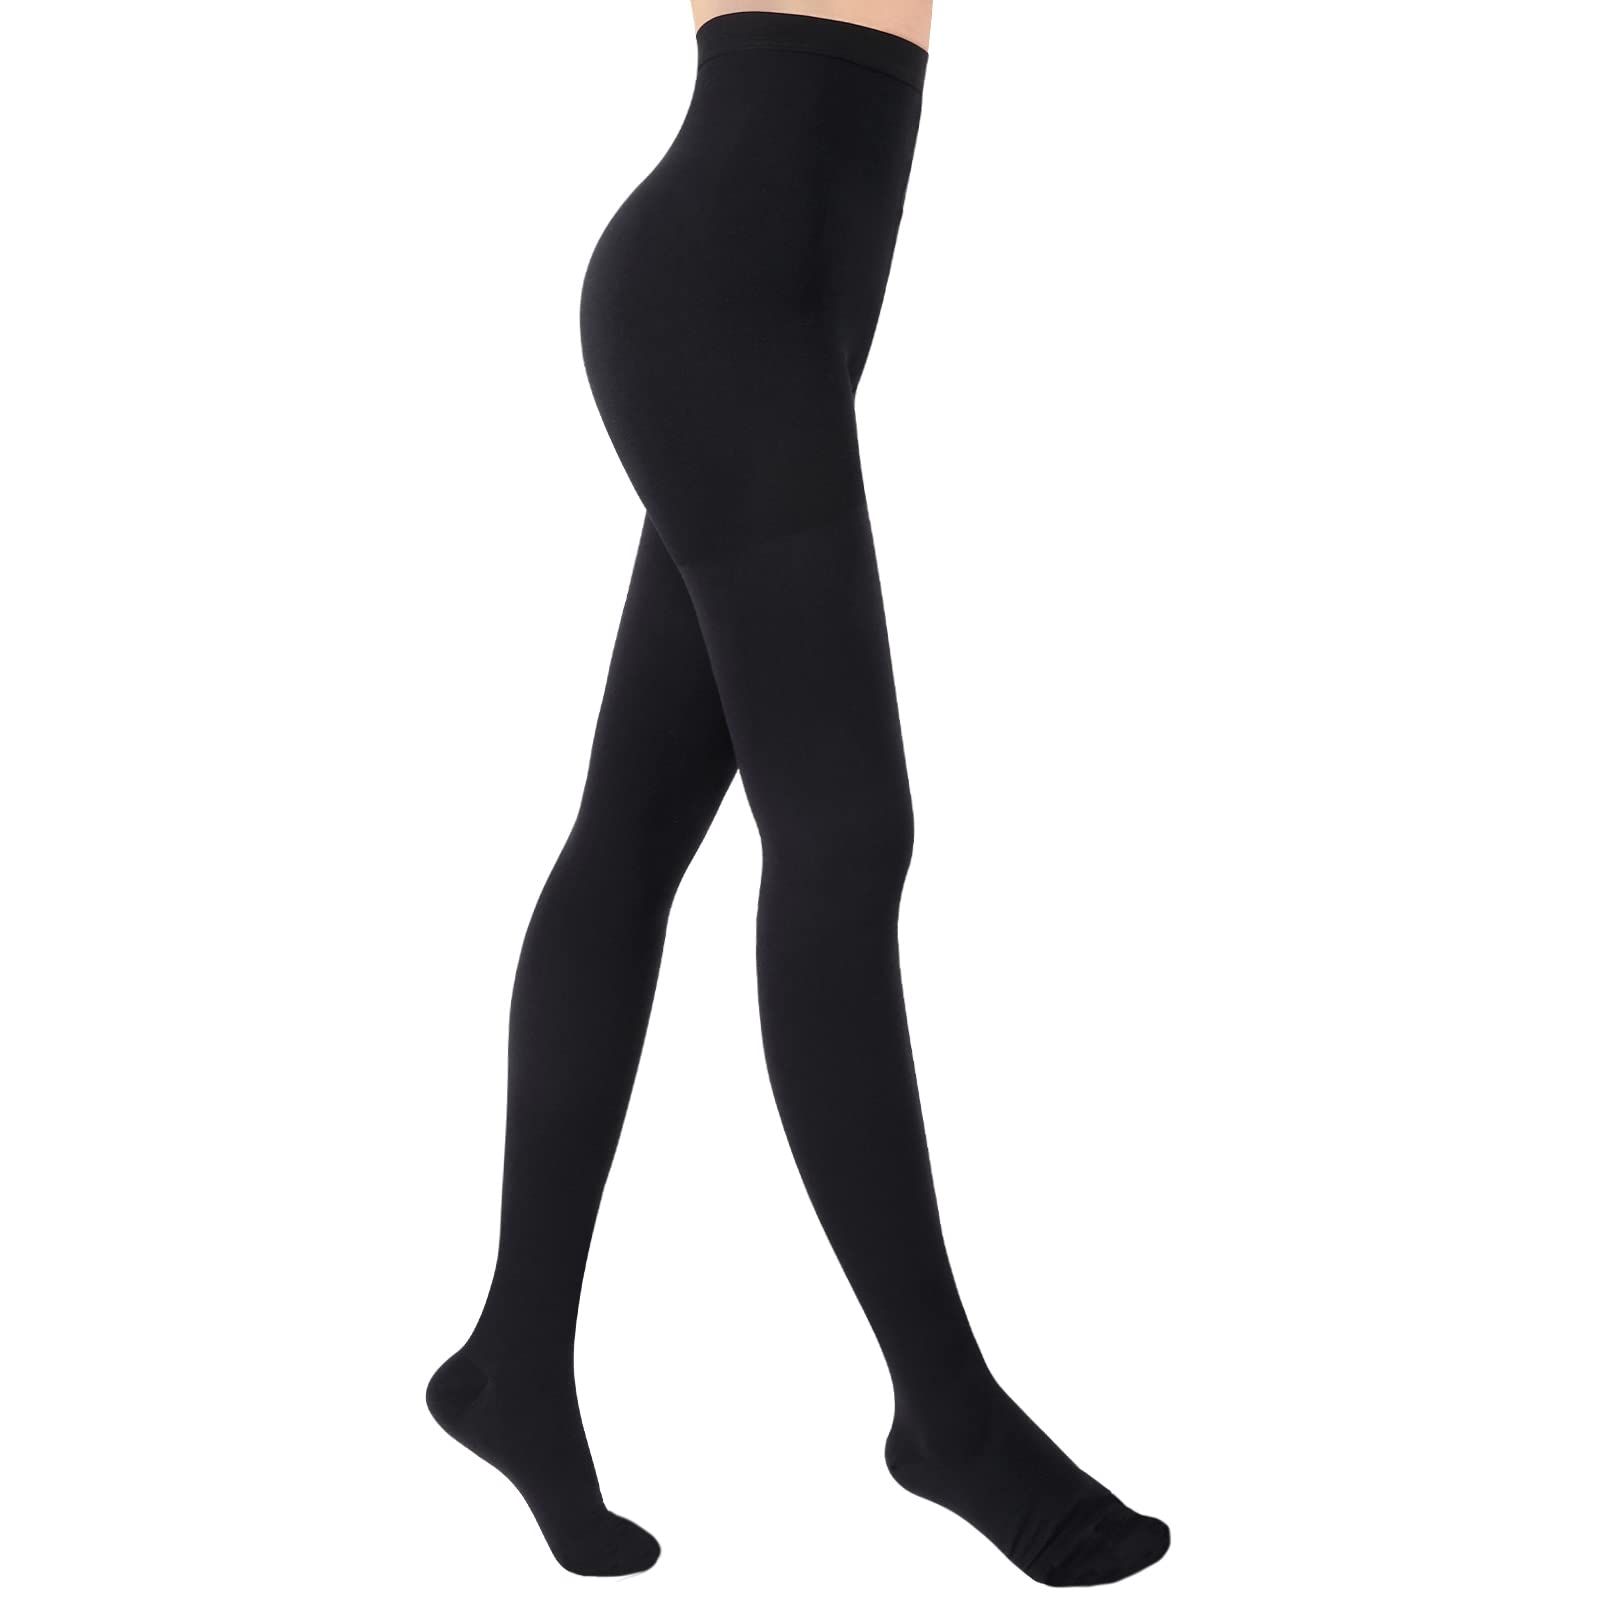 Compression Pantyhose for Women and Men, Closed Toe Medical